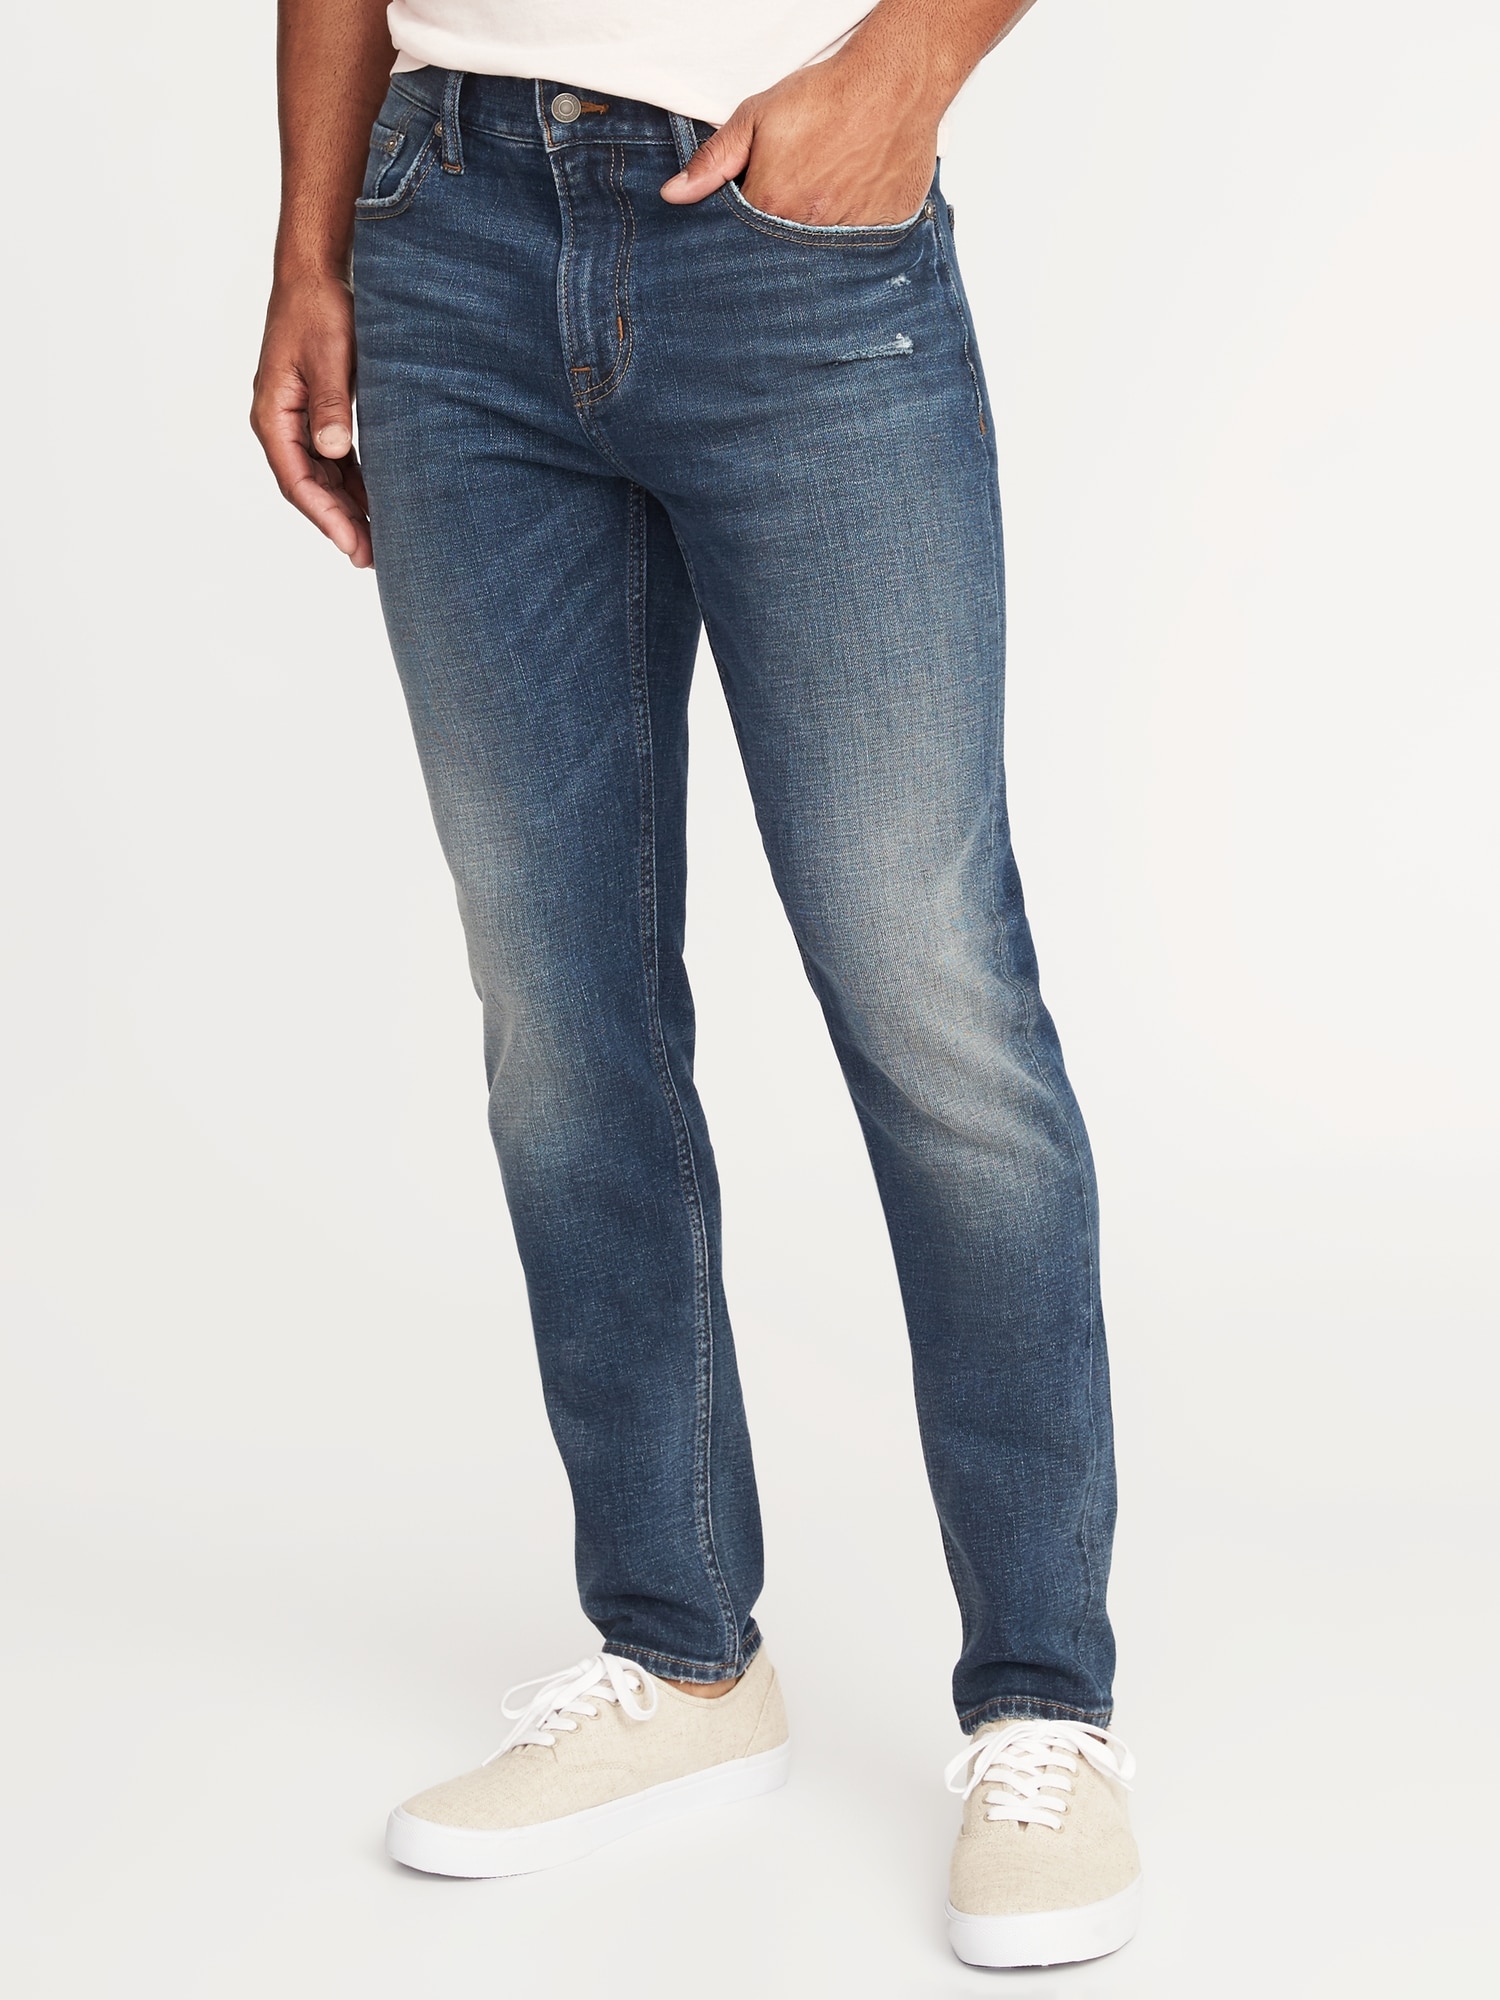 Relaxed Slim Built-In Flex Jeans For 